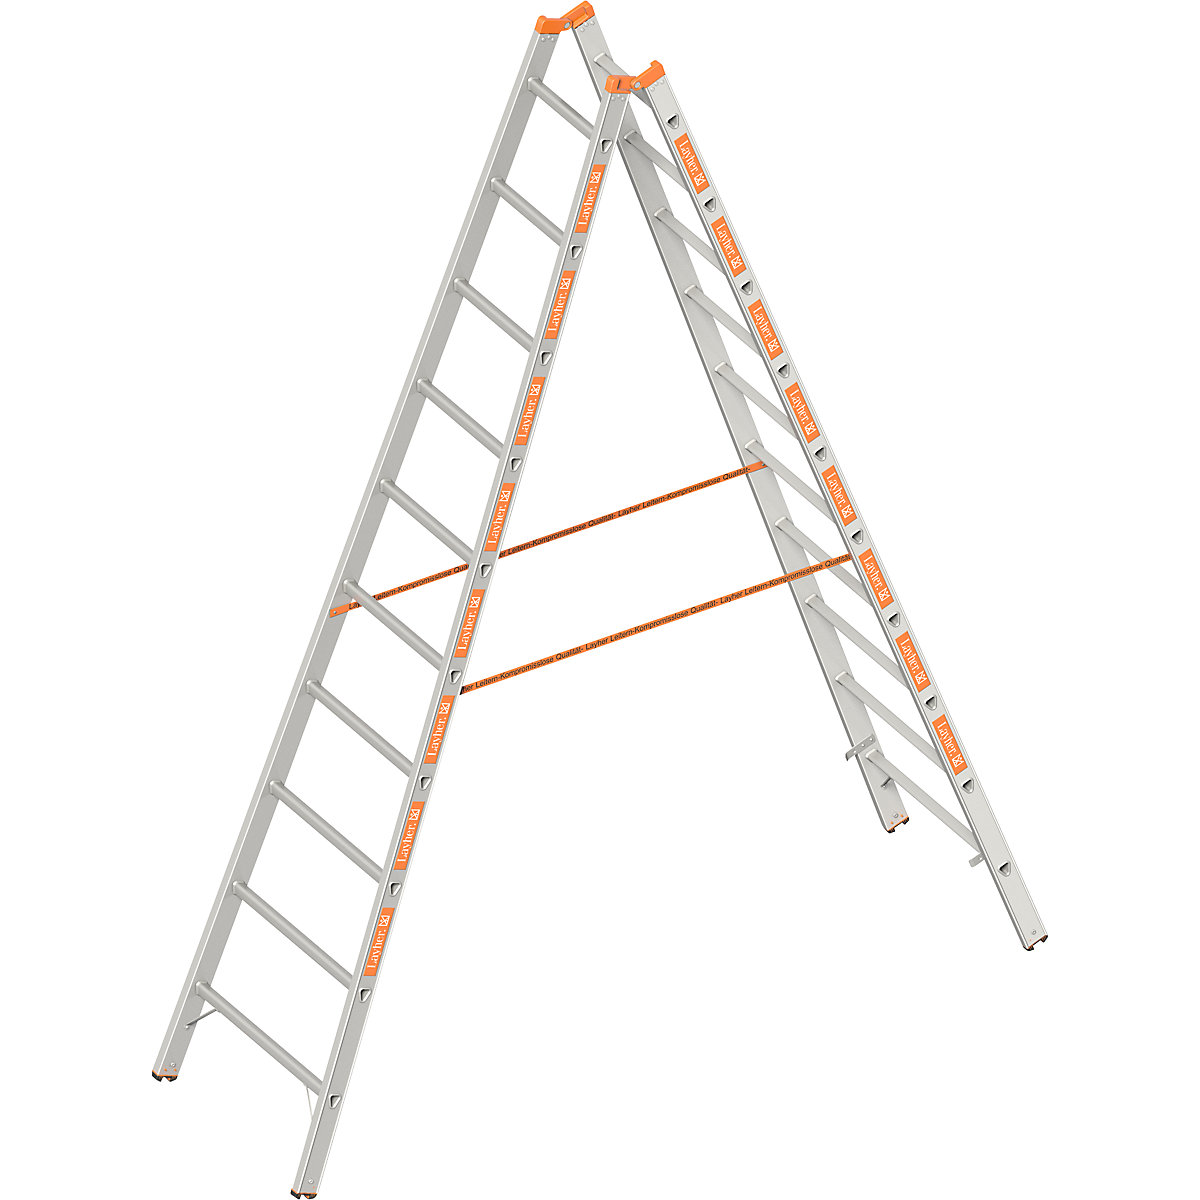 Double sided rung ladder – Layher, double sided access, 2 x 10 rungs-1